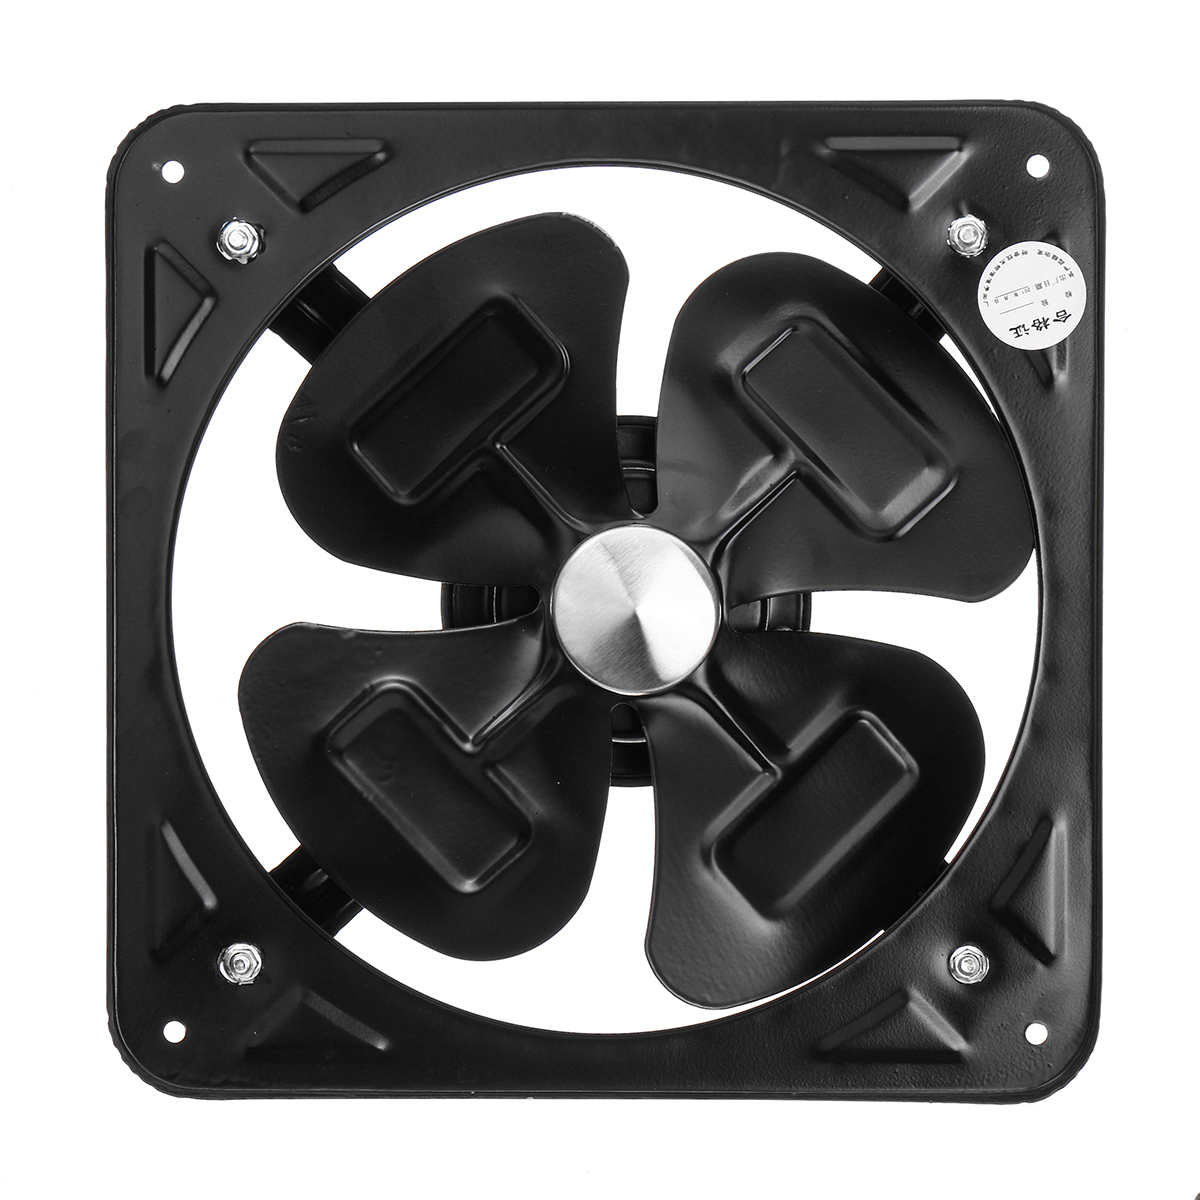 10Inch-220V-40W-Stainless-Steel-Axial-Fan-High-Speed-Quiet-Ventilation-Cooling-Exhaust-Fan-Fume-Extr-1541282-4